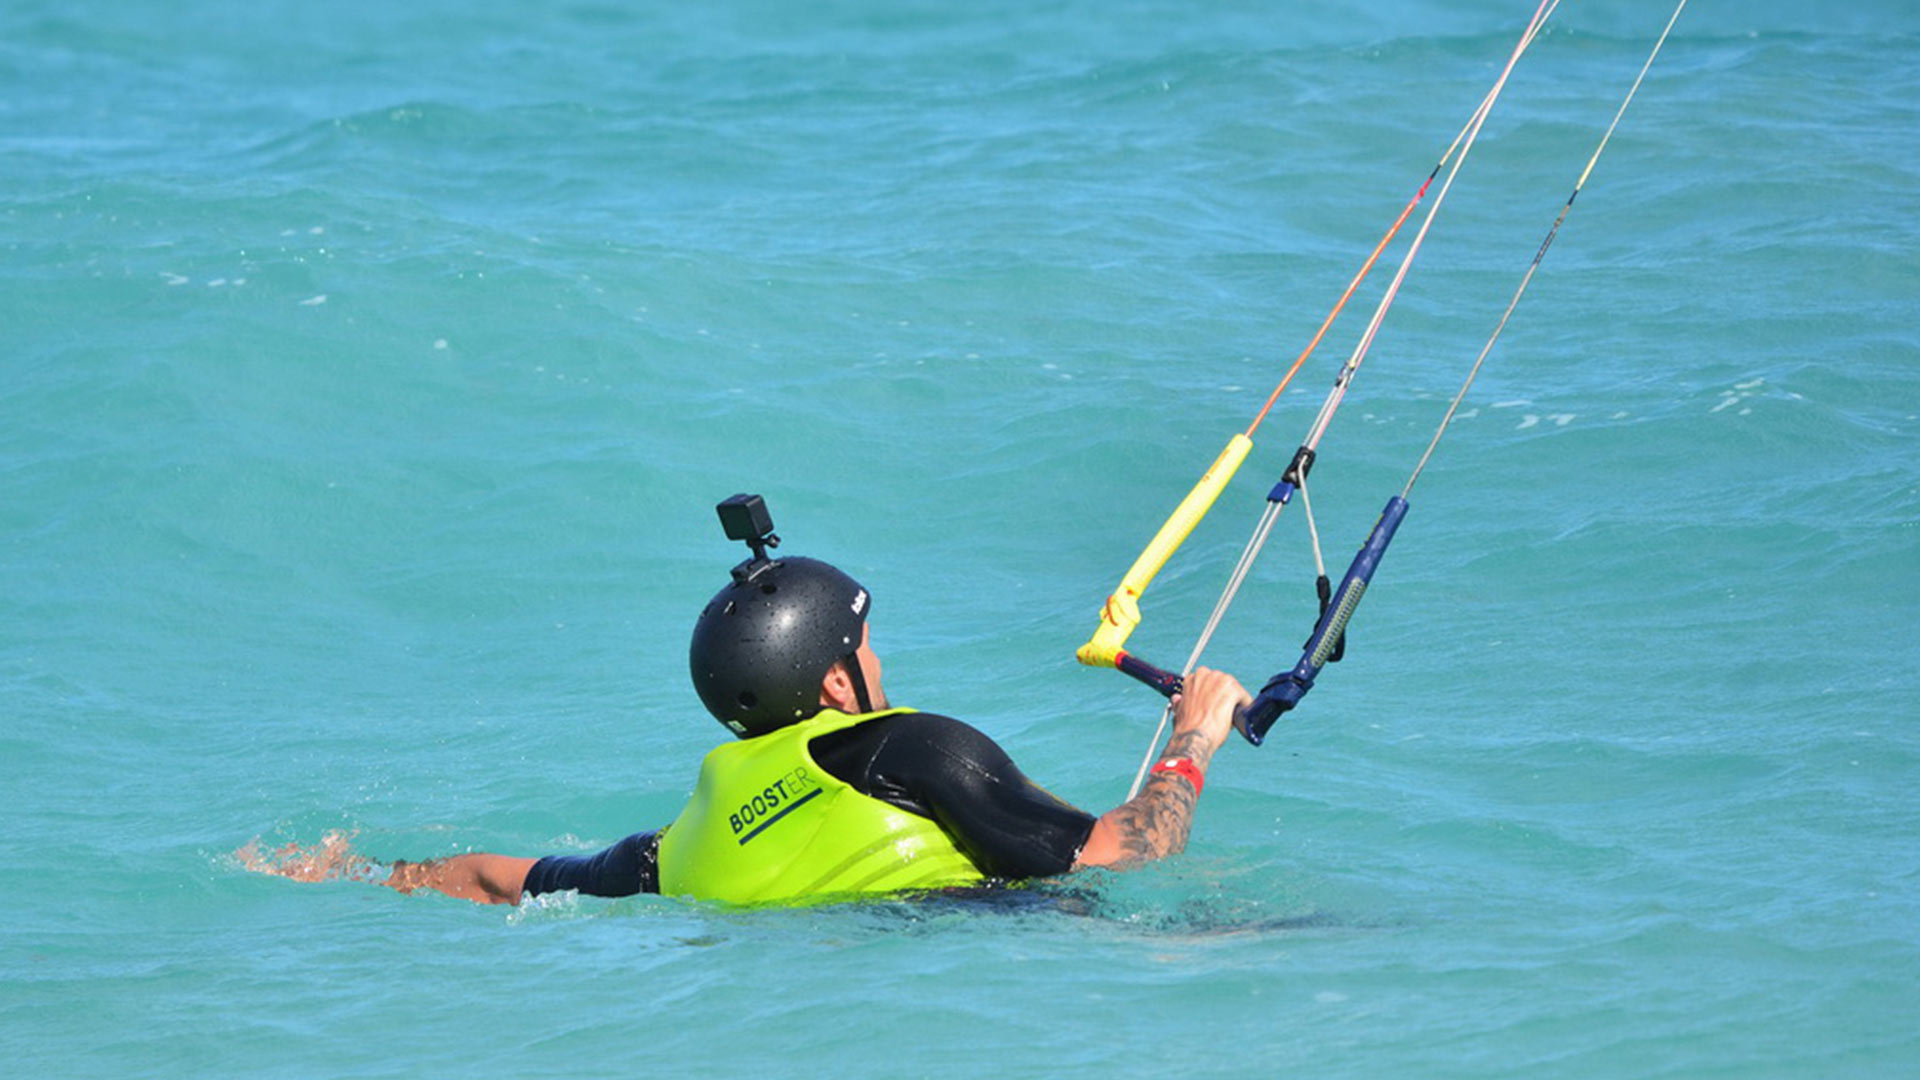 A kitesurfing student practises bodydragging in the water during his beginner's course.